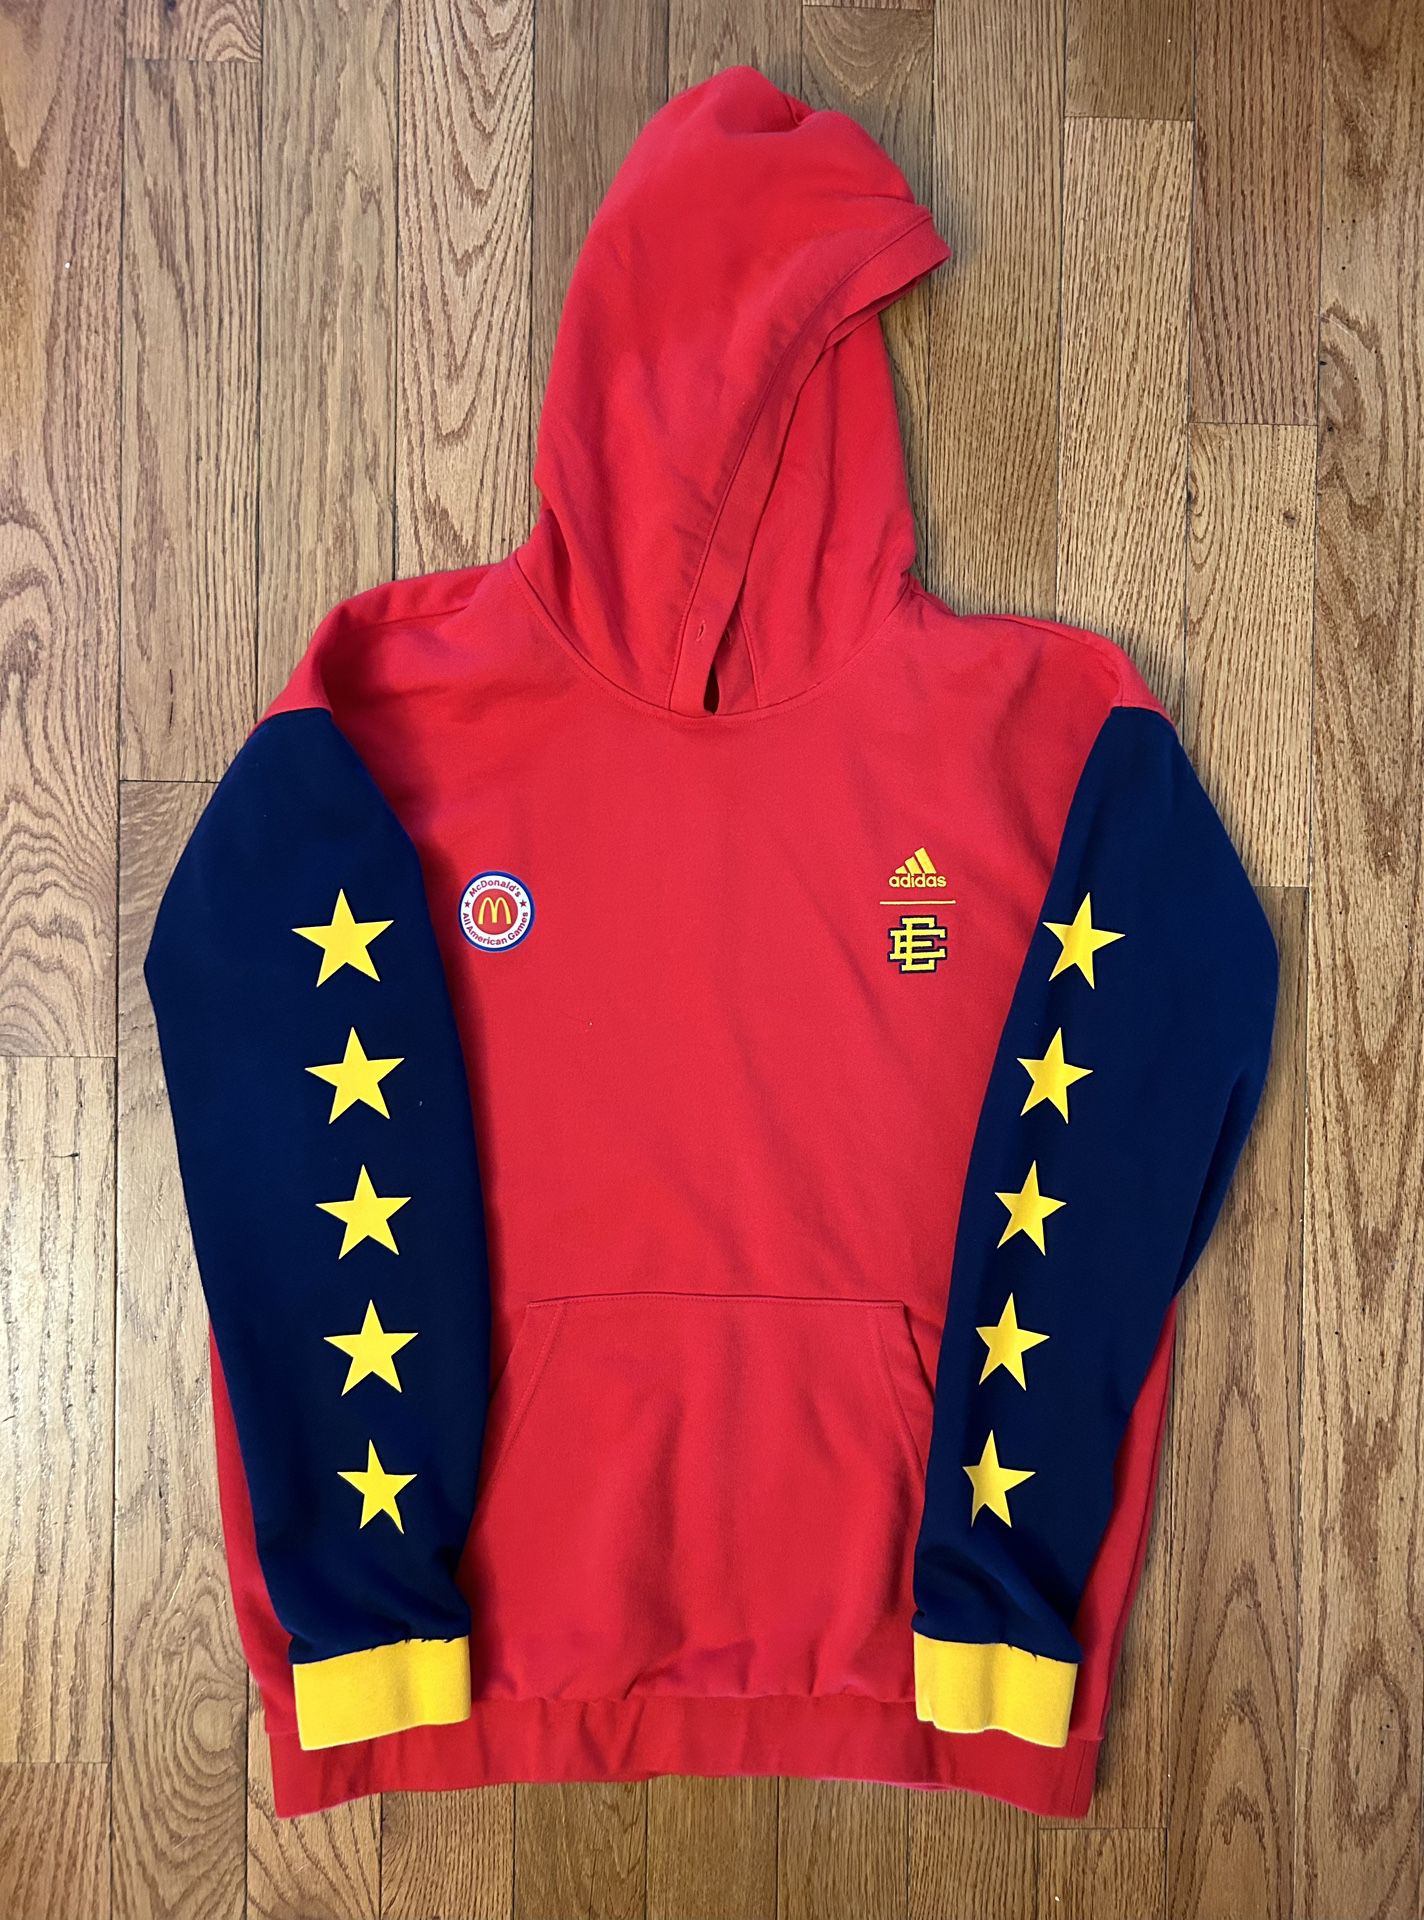 Adidas x Eric Emanuel McDonald’s All American Games 2022 Hoodie Size Large